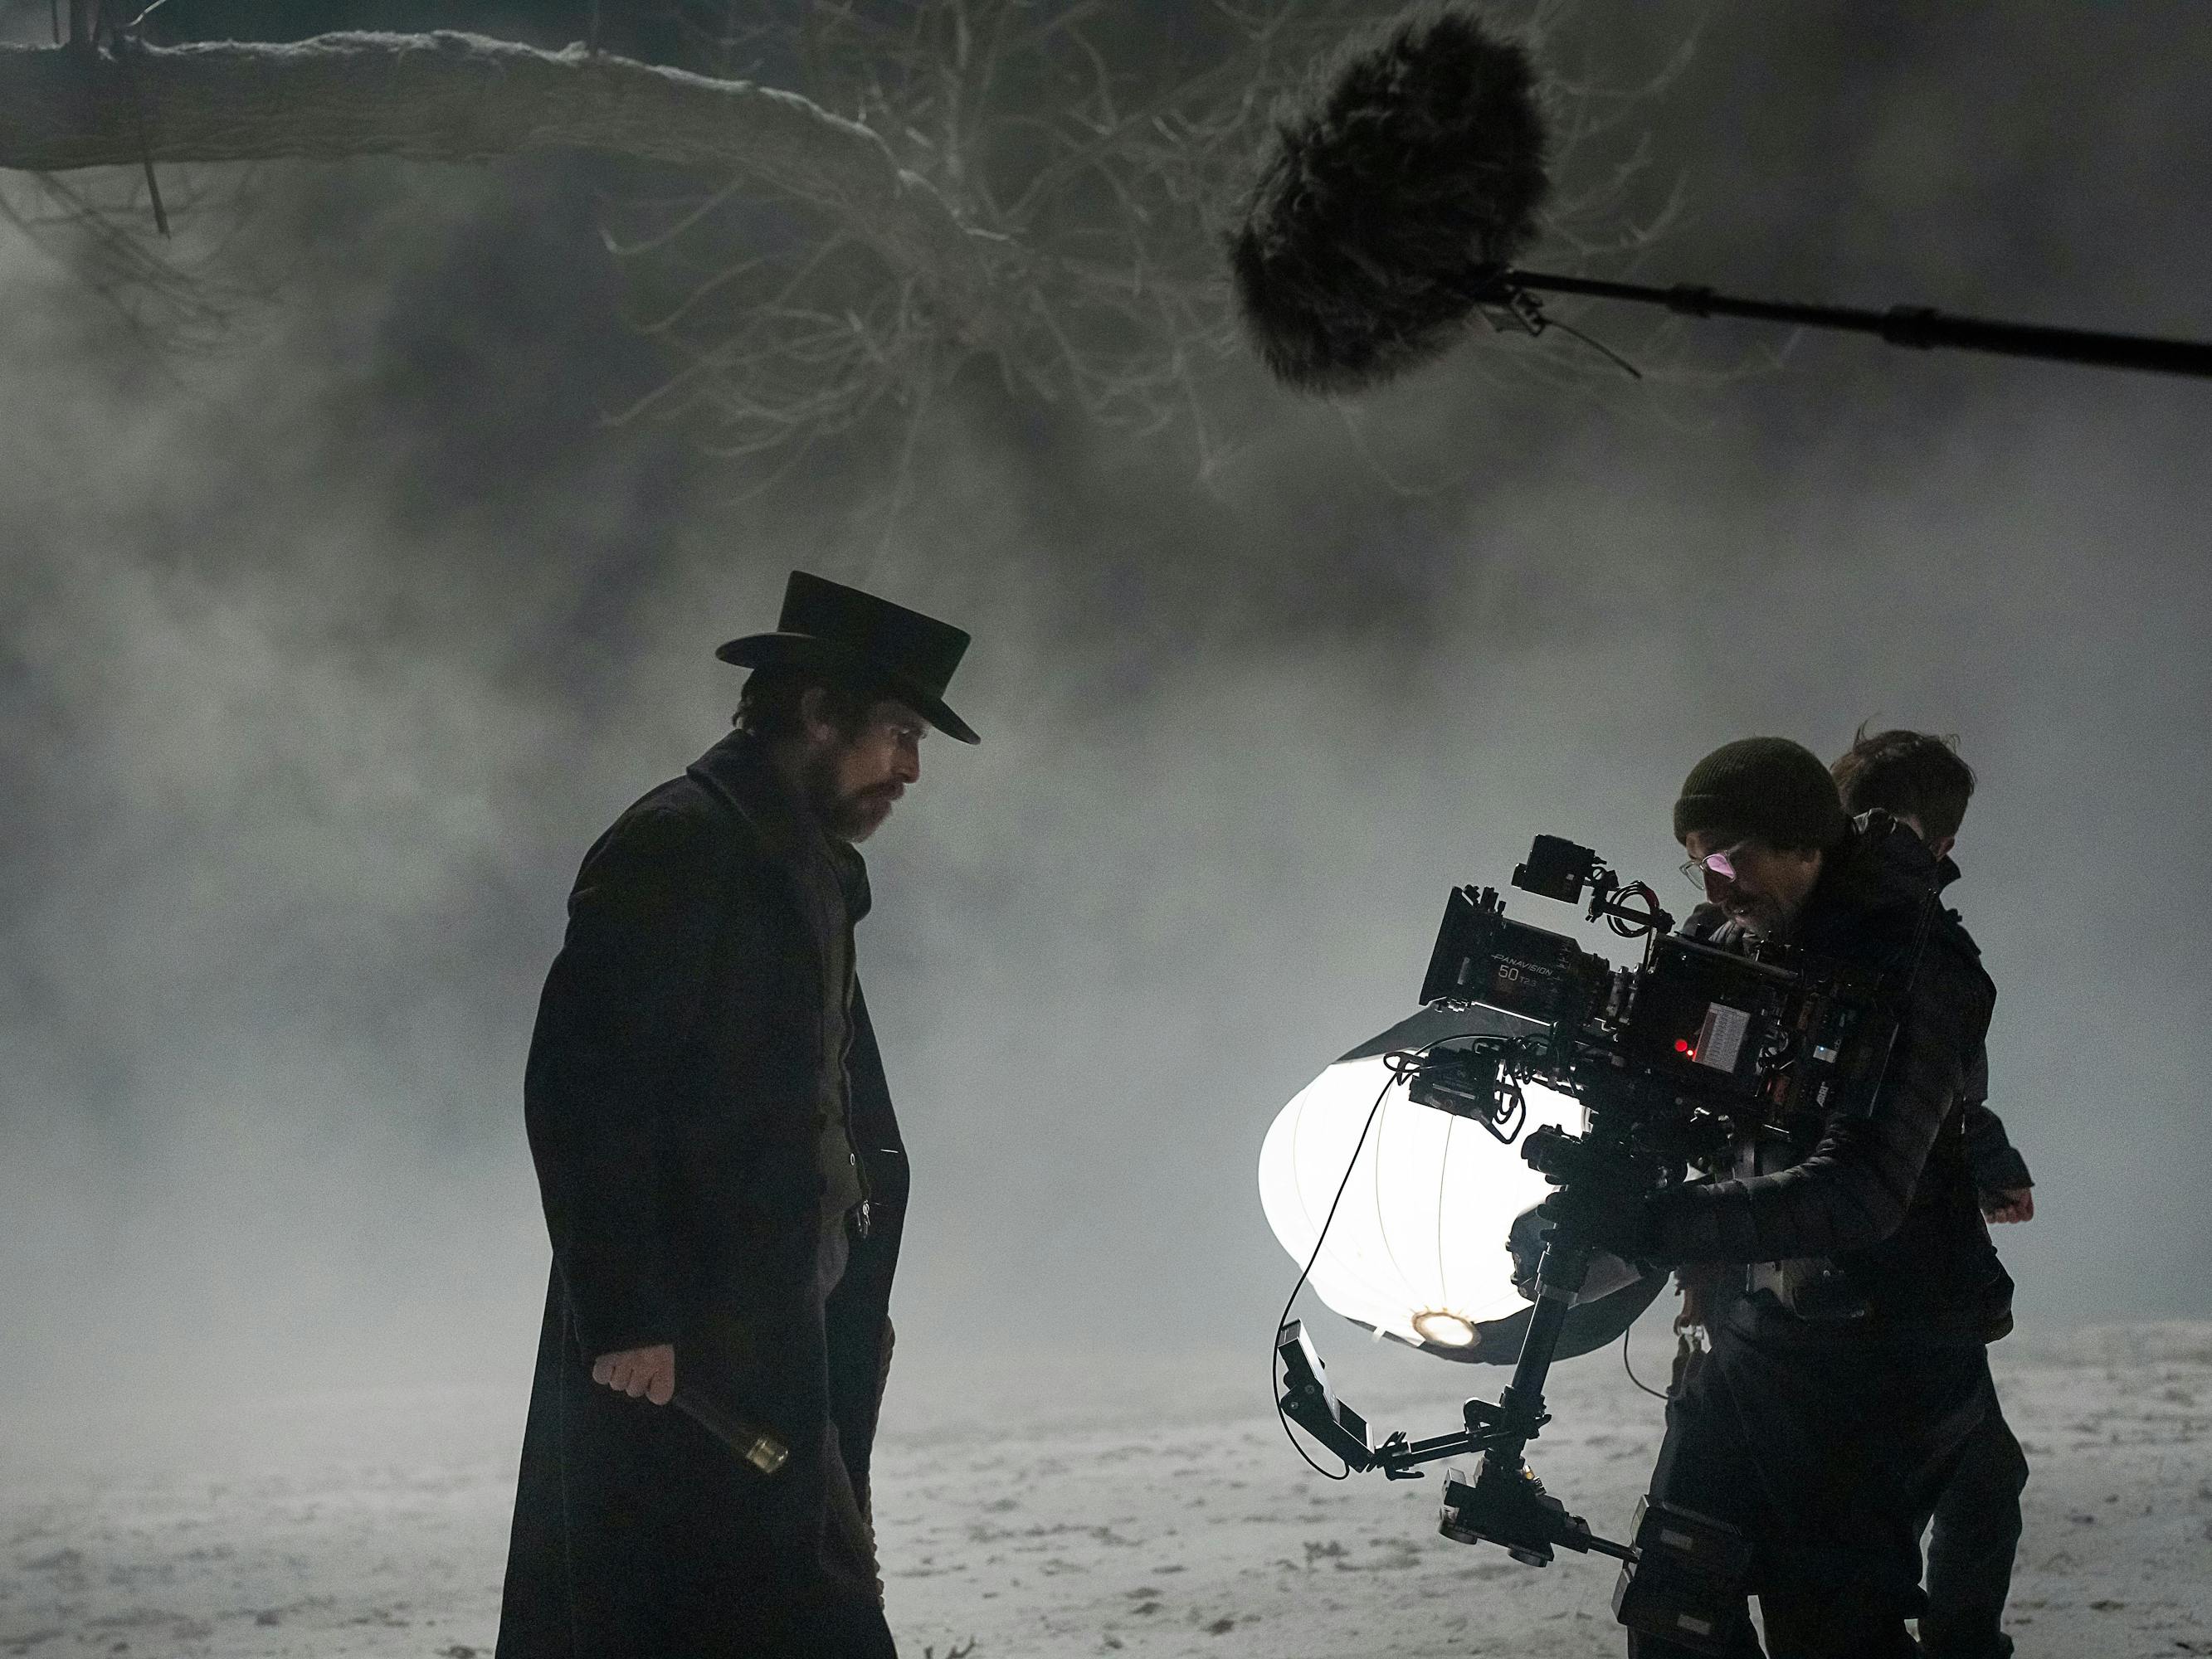 Christian Bale wears a top hat and a dark coat on the set of The Pale Blue Eye. Some crew members stand to his right. The scene is snowy and spooky.